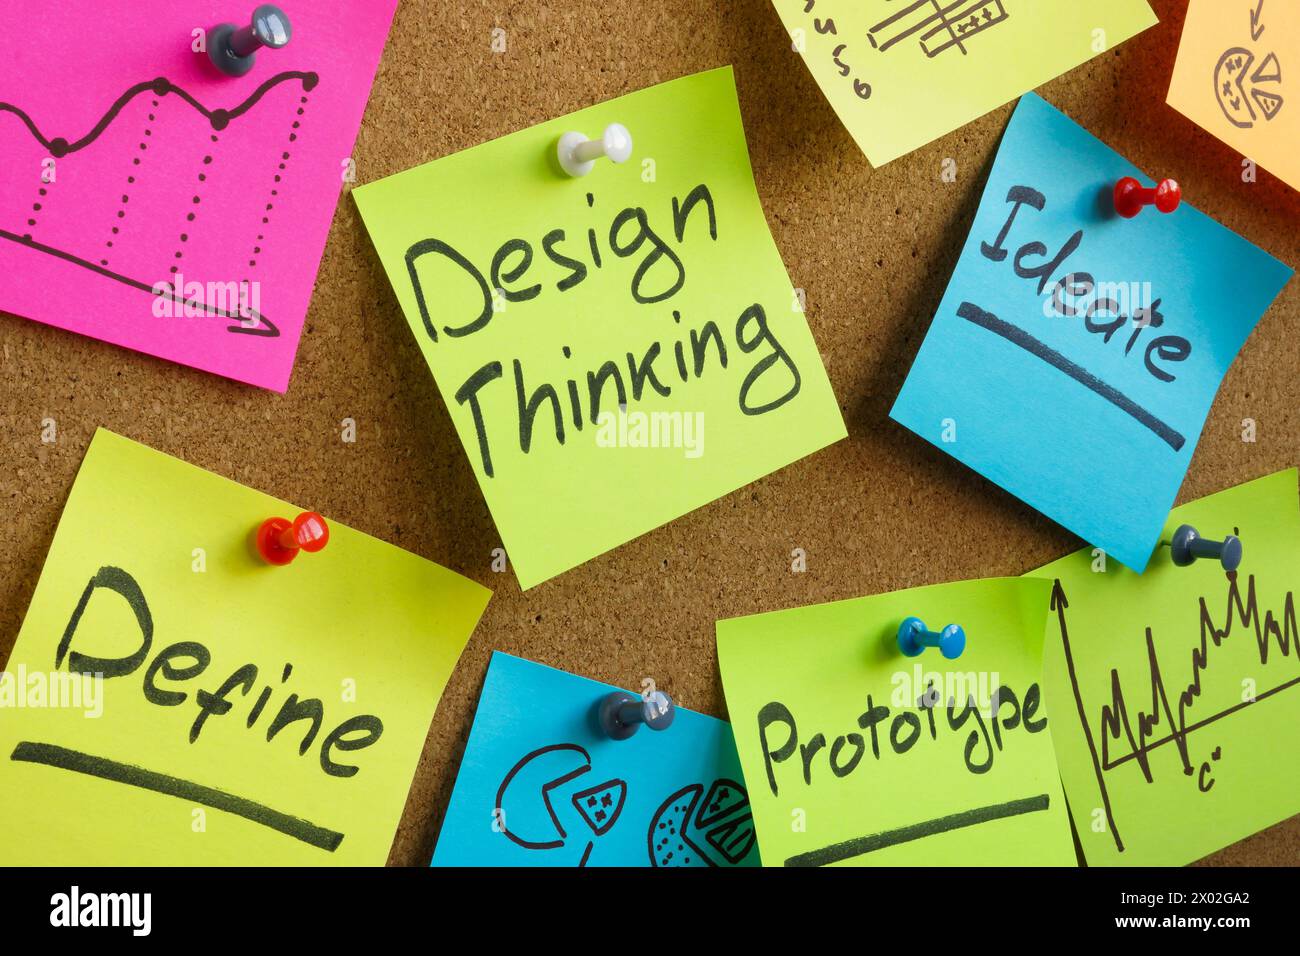 Design thinking concept. Board with sticks attached. Stock Photo